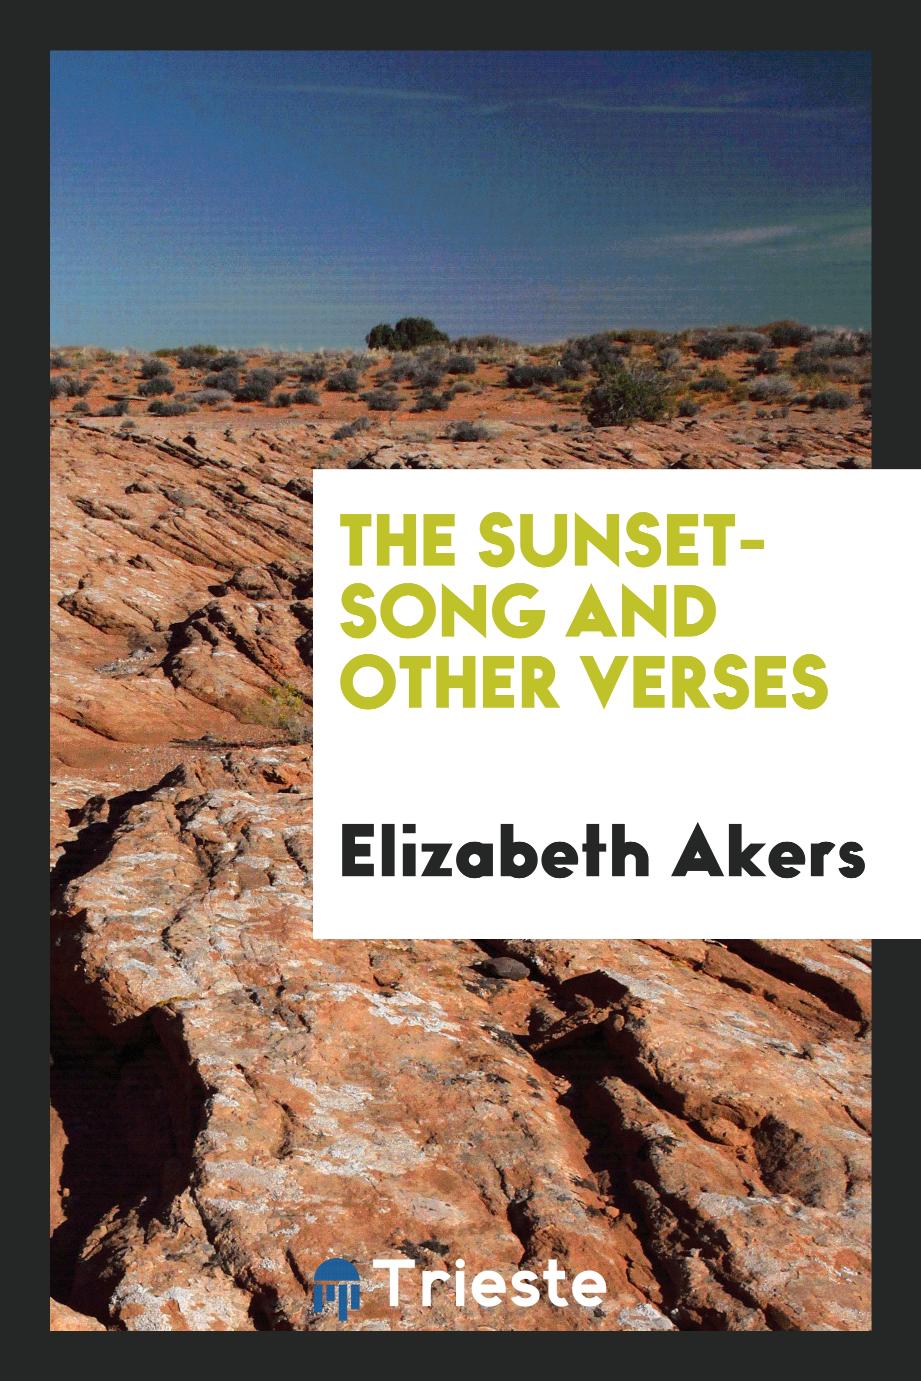 The Sunset-Song and Other Verses